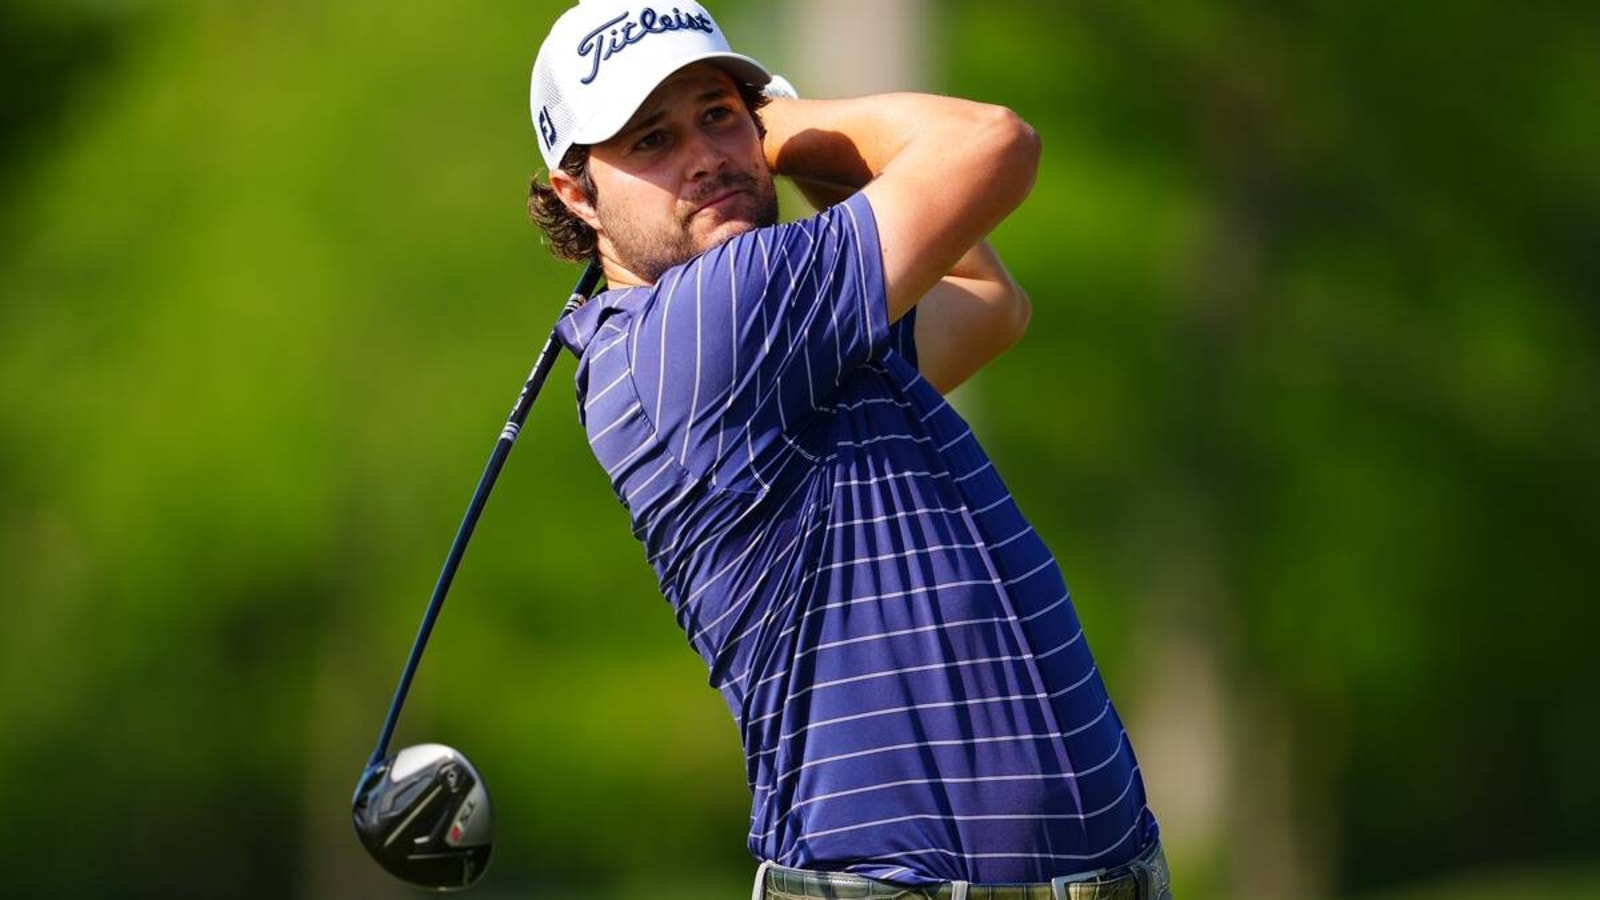 Peter Uihlein at the Wells Fargo Championship Live: TV Channel & Streaming Online